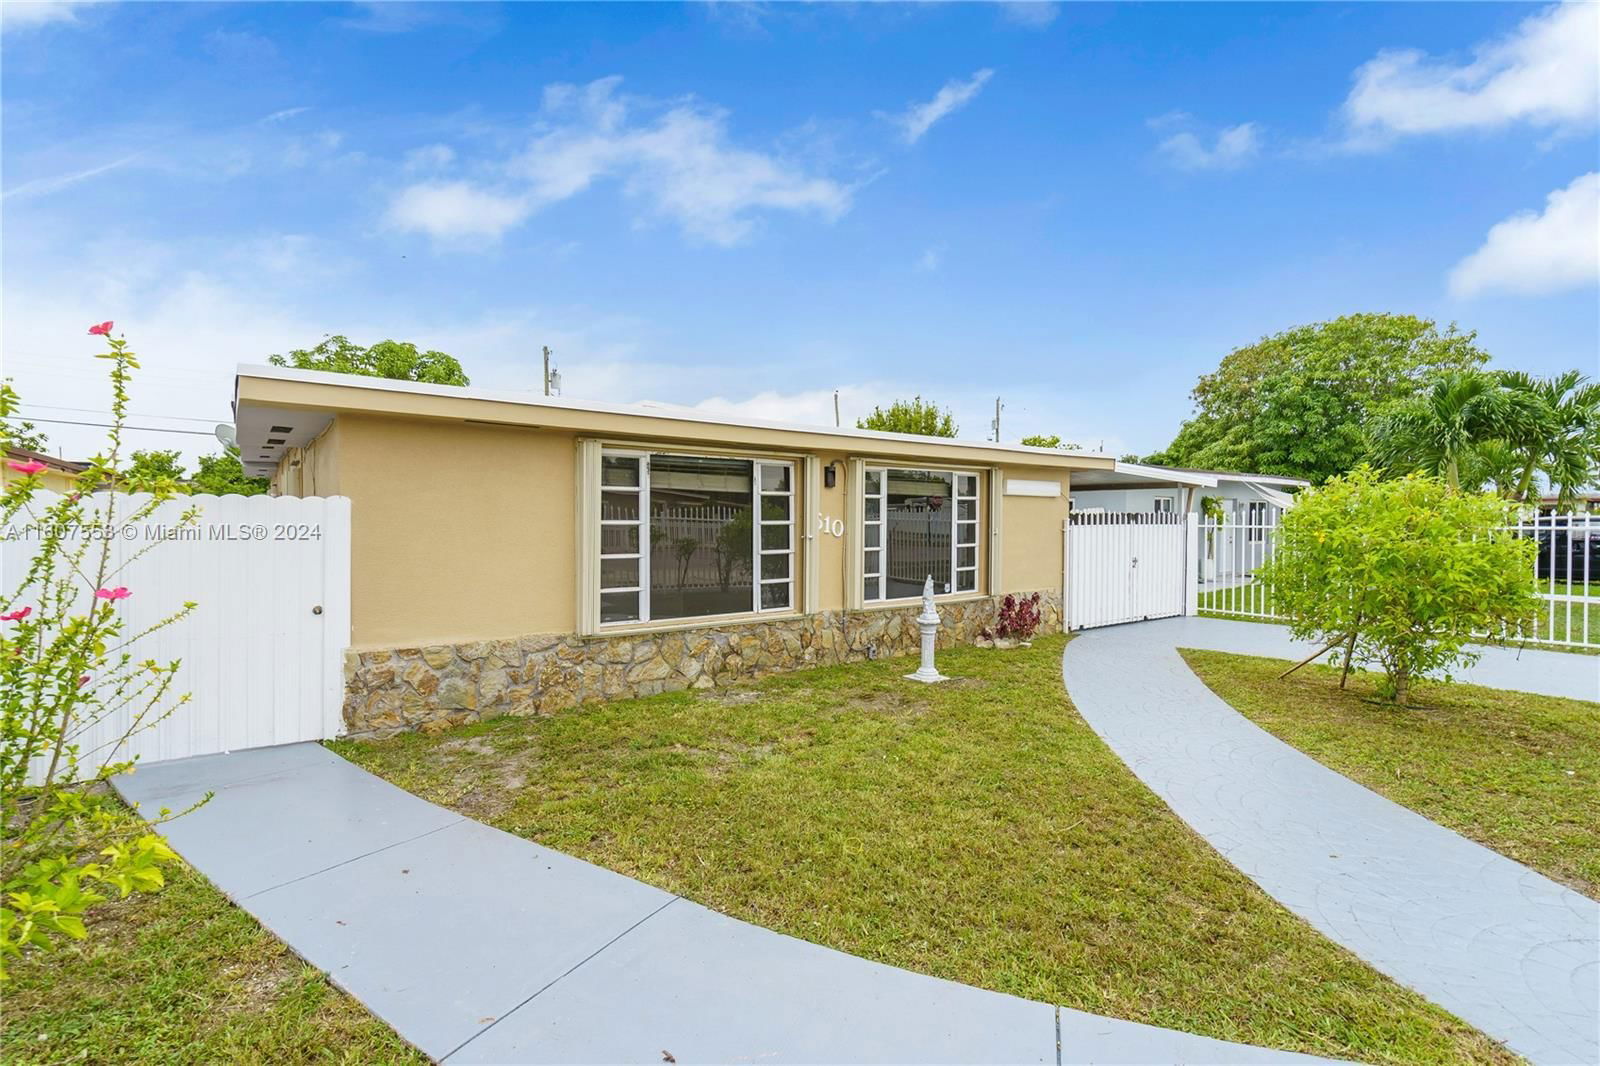 Real estate property located at 510 47th St, Miami-Dade County, HIALEAH 16 ADDN AMD & REV, Hialeah, FL